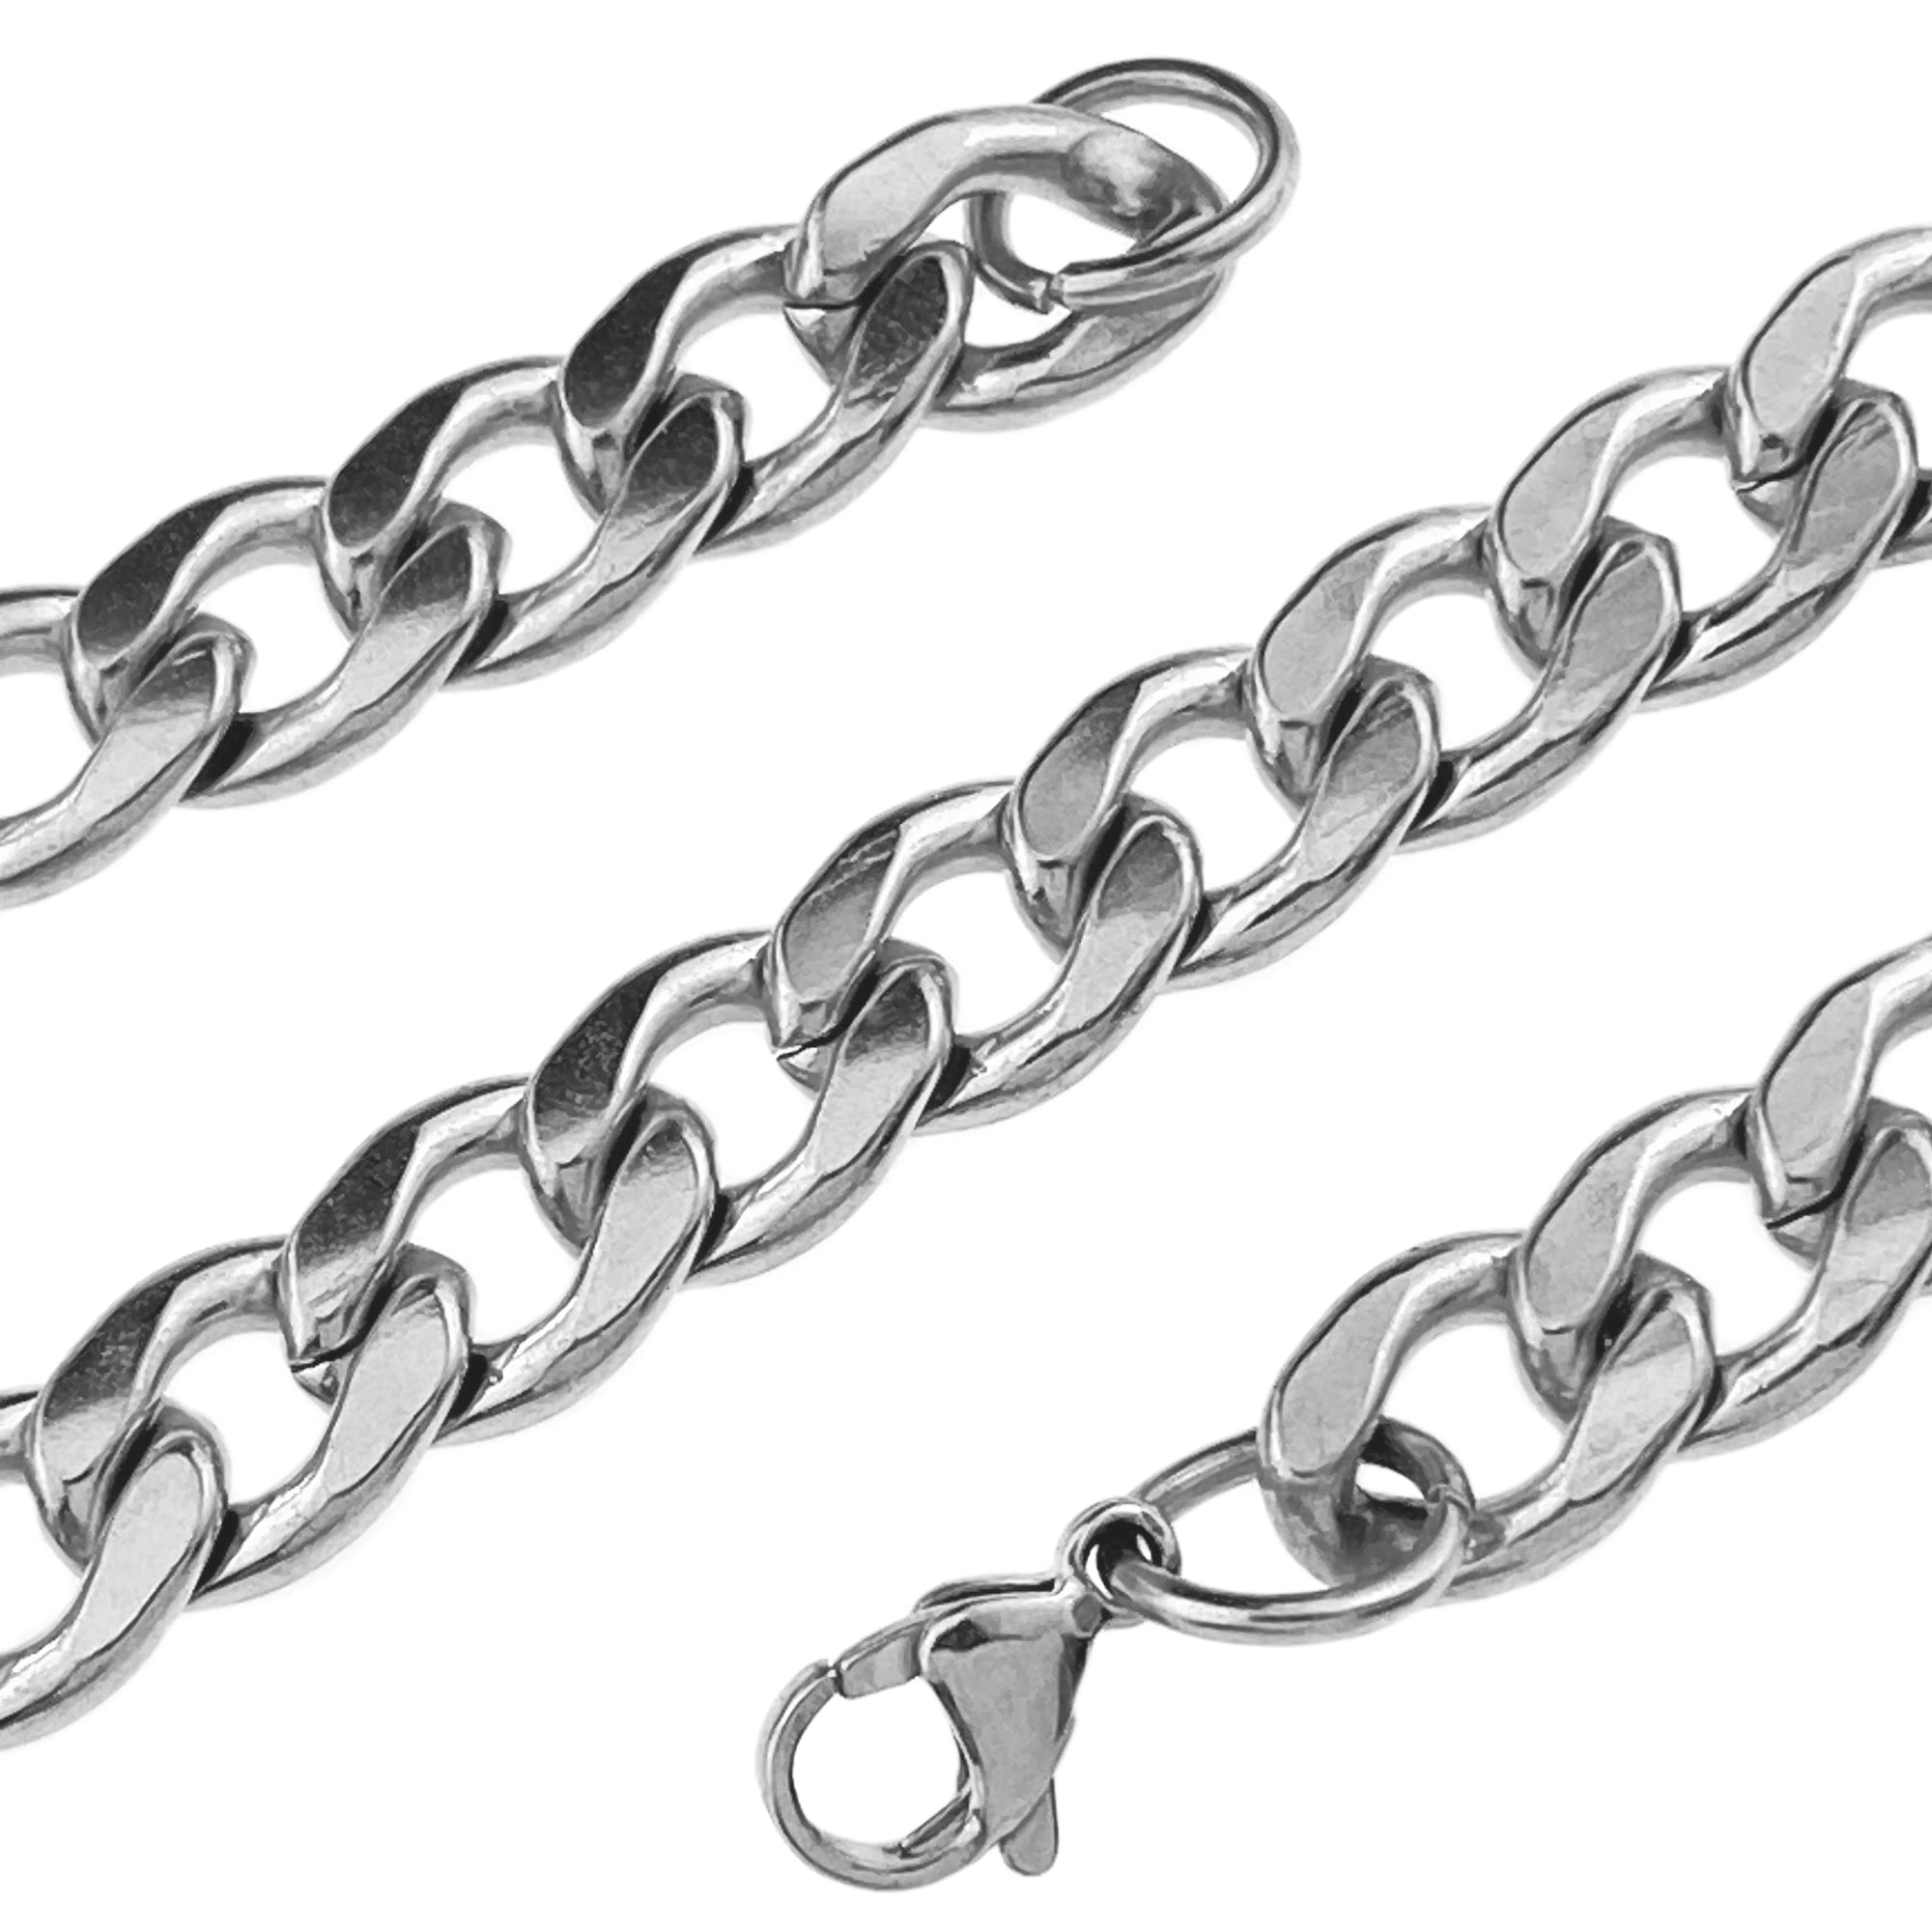 24" 15mm Silver Men Chain Necklace 316L Stainless Steel Curb Link Choker Jewelry 